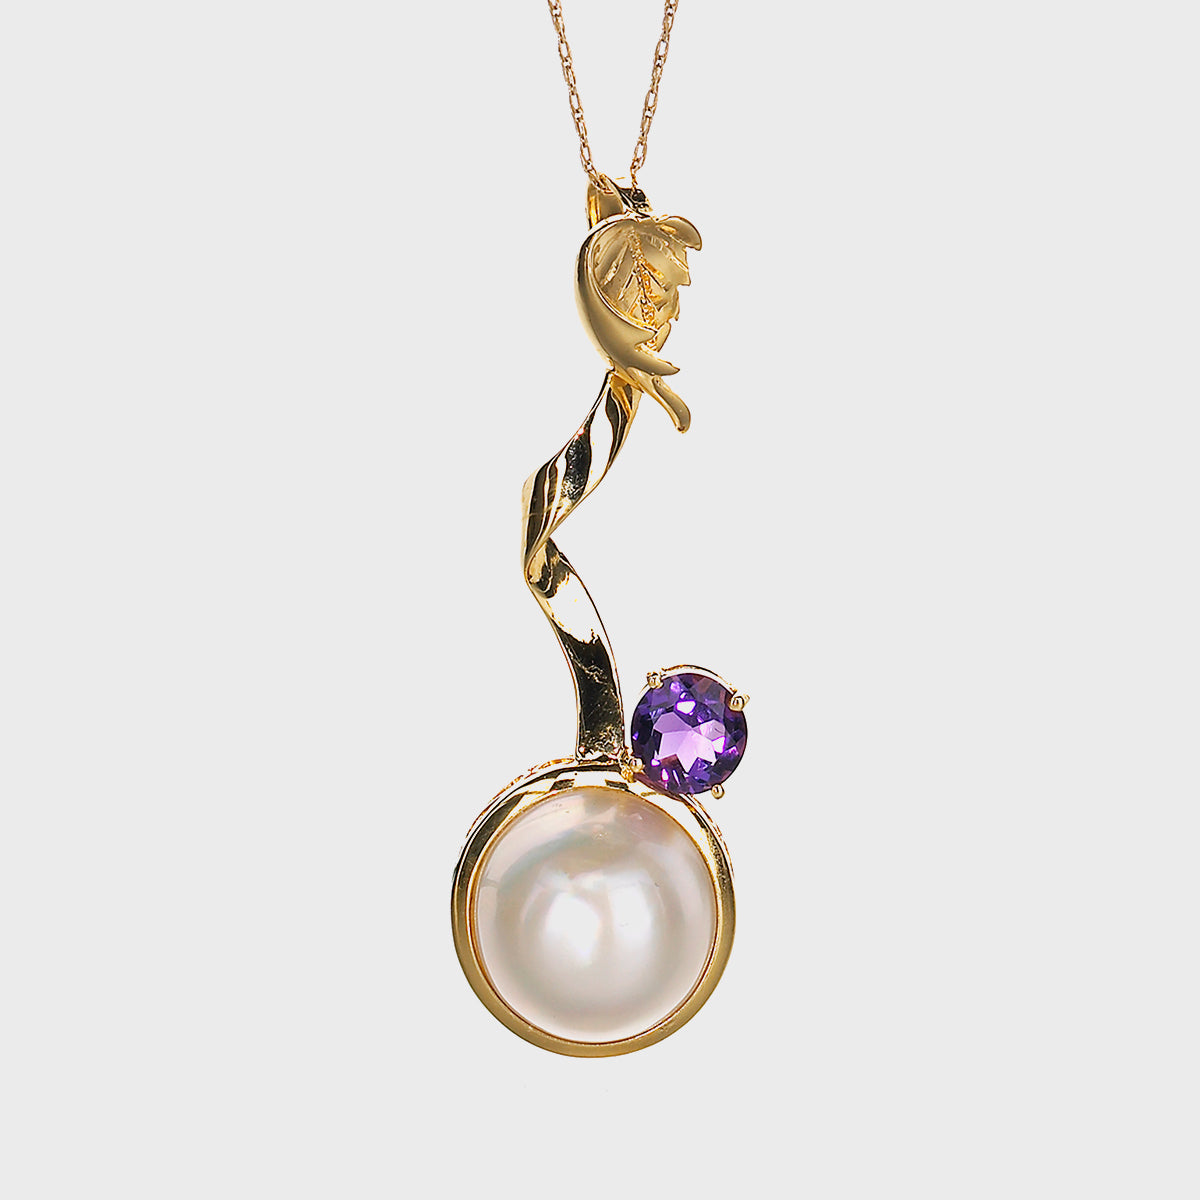 Stylized Yellow Gold Pearl of Great Price® Pendant